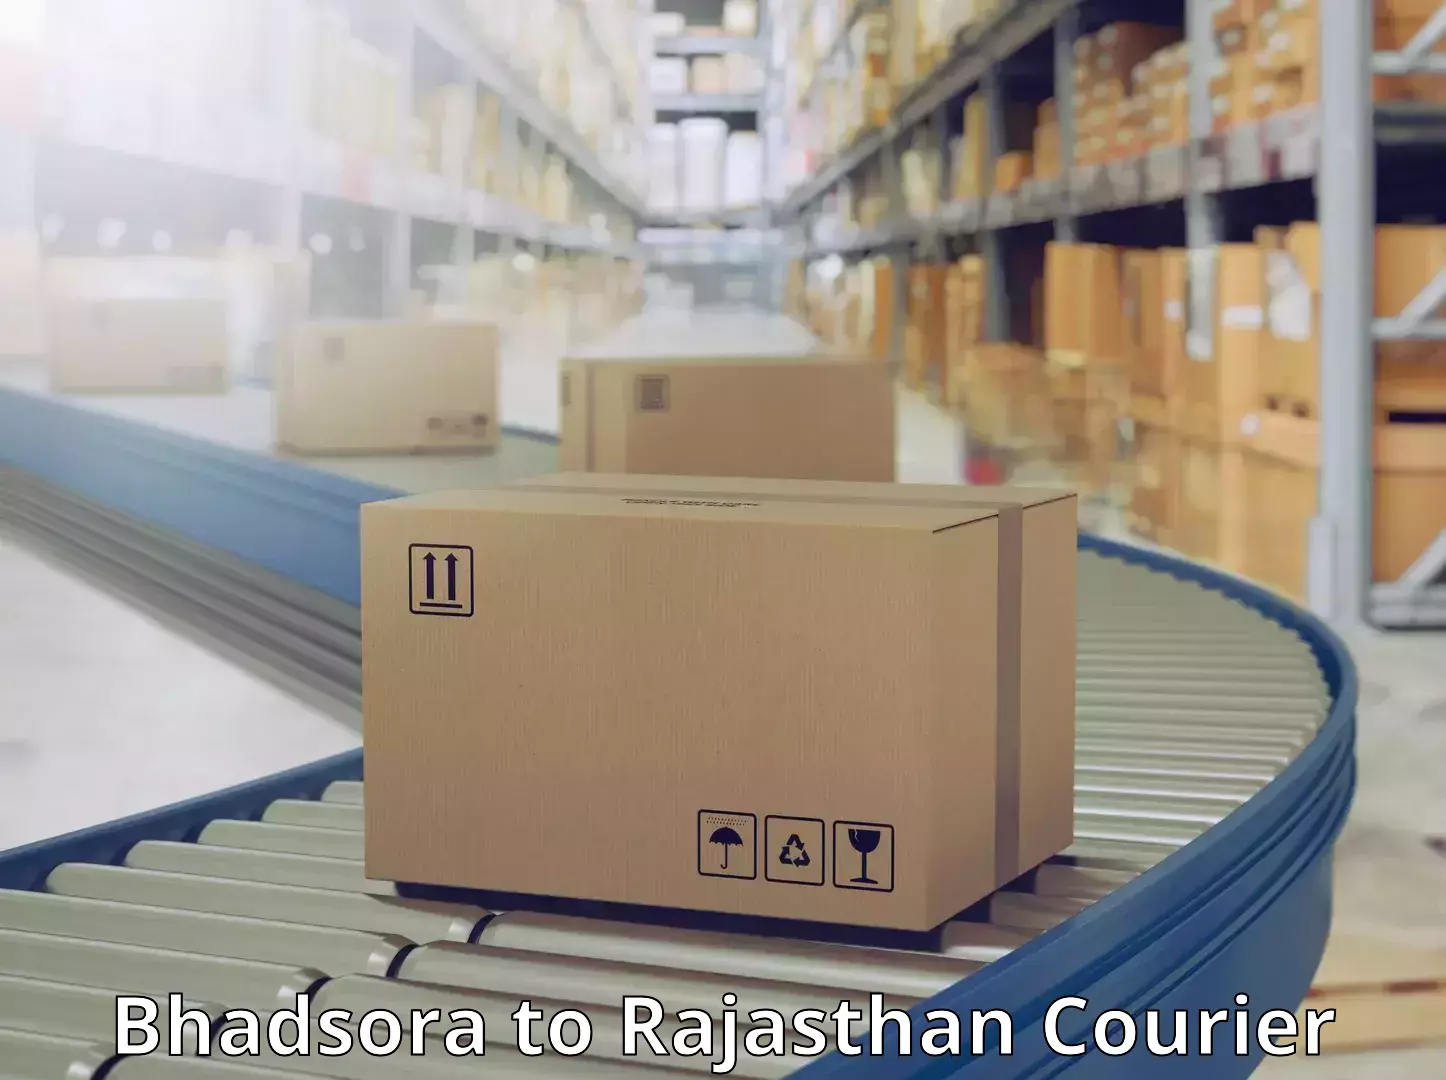 Nationwide parcel services Bhadsora to Kishangarh